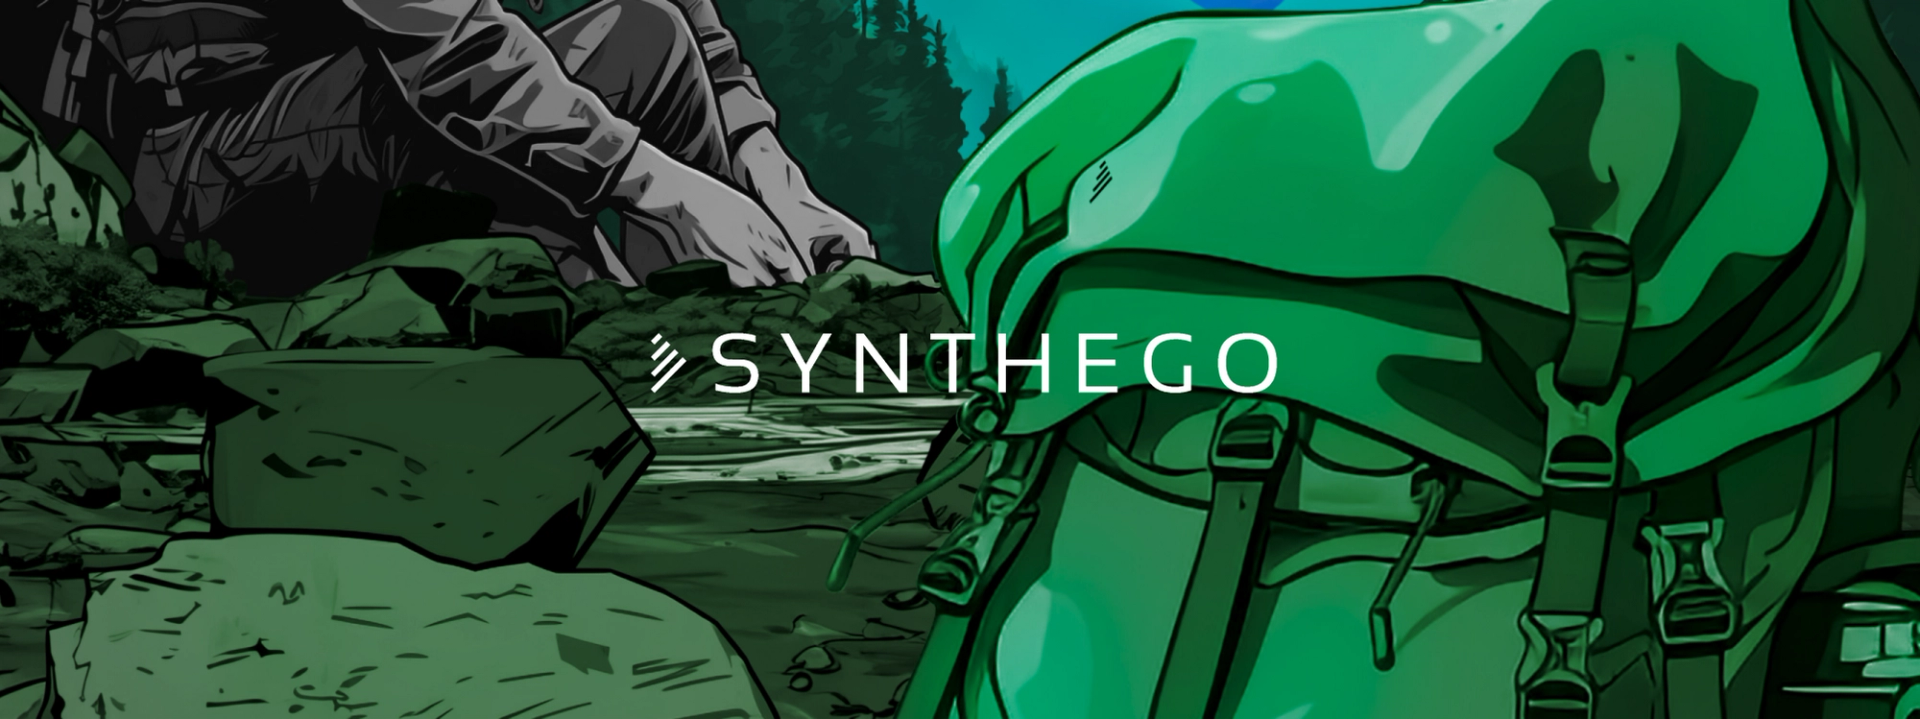 How Synthego Crafted a Stellar Animation in 5 Days